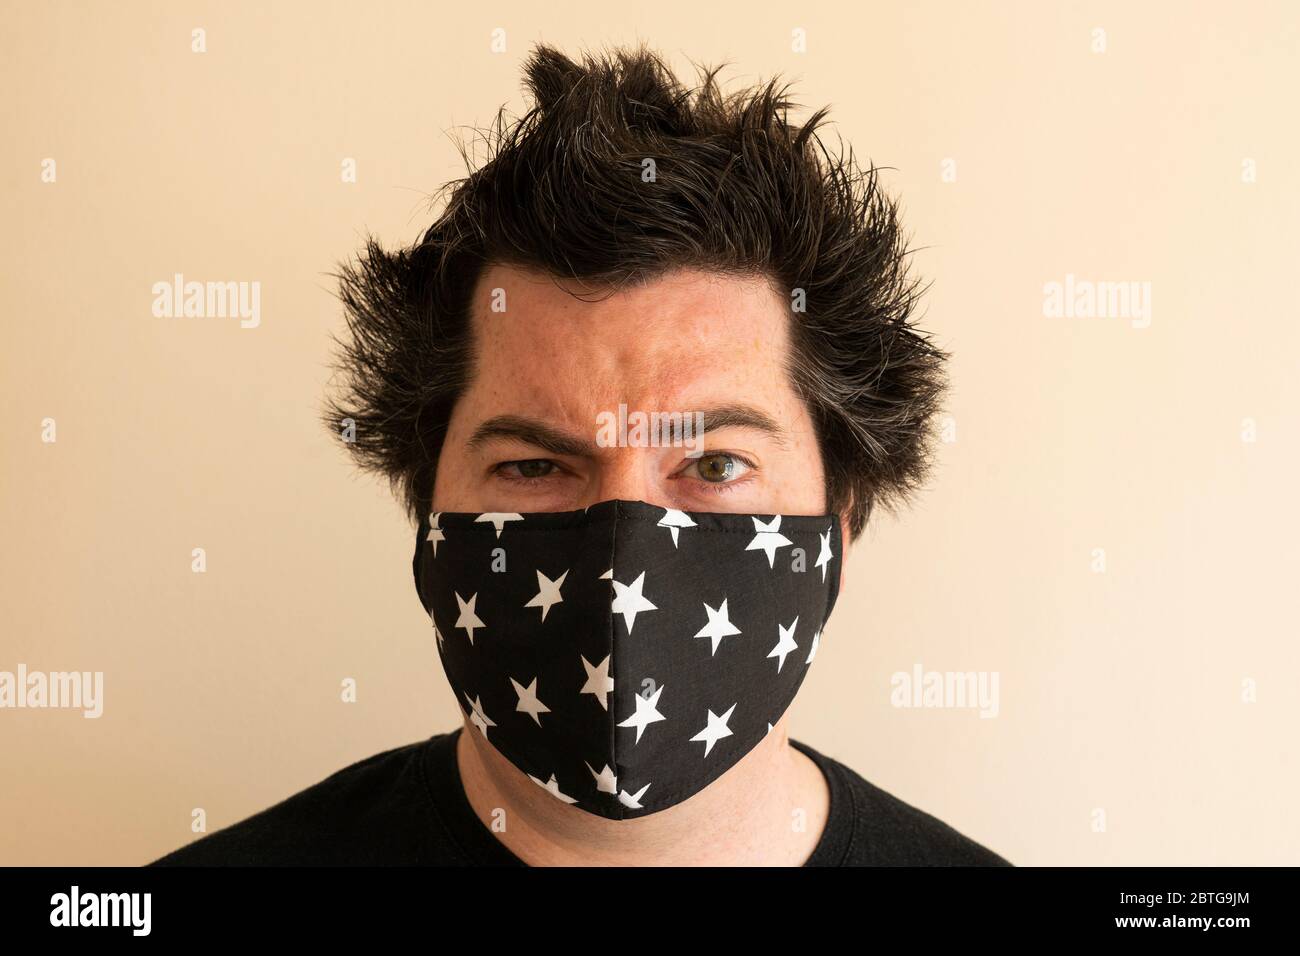 A man in his late thirties wearing reusable face mask looking directly at the viewer during the Covid 19 Coronavirus pandemic with wild lockdown hair Stock Photo